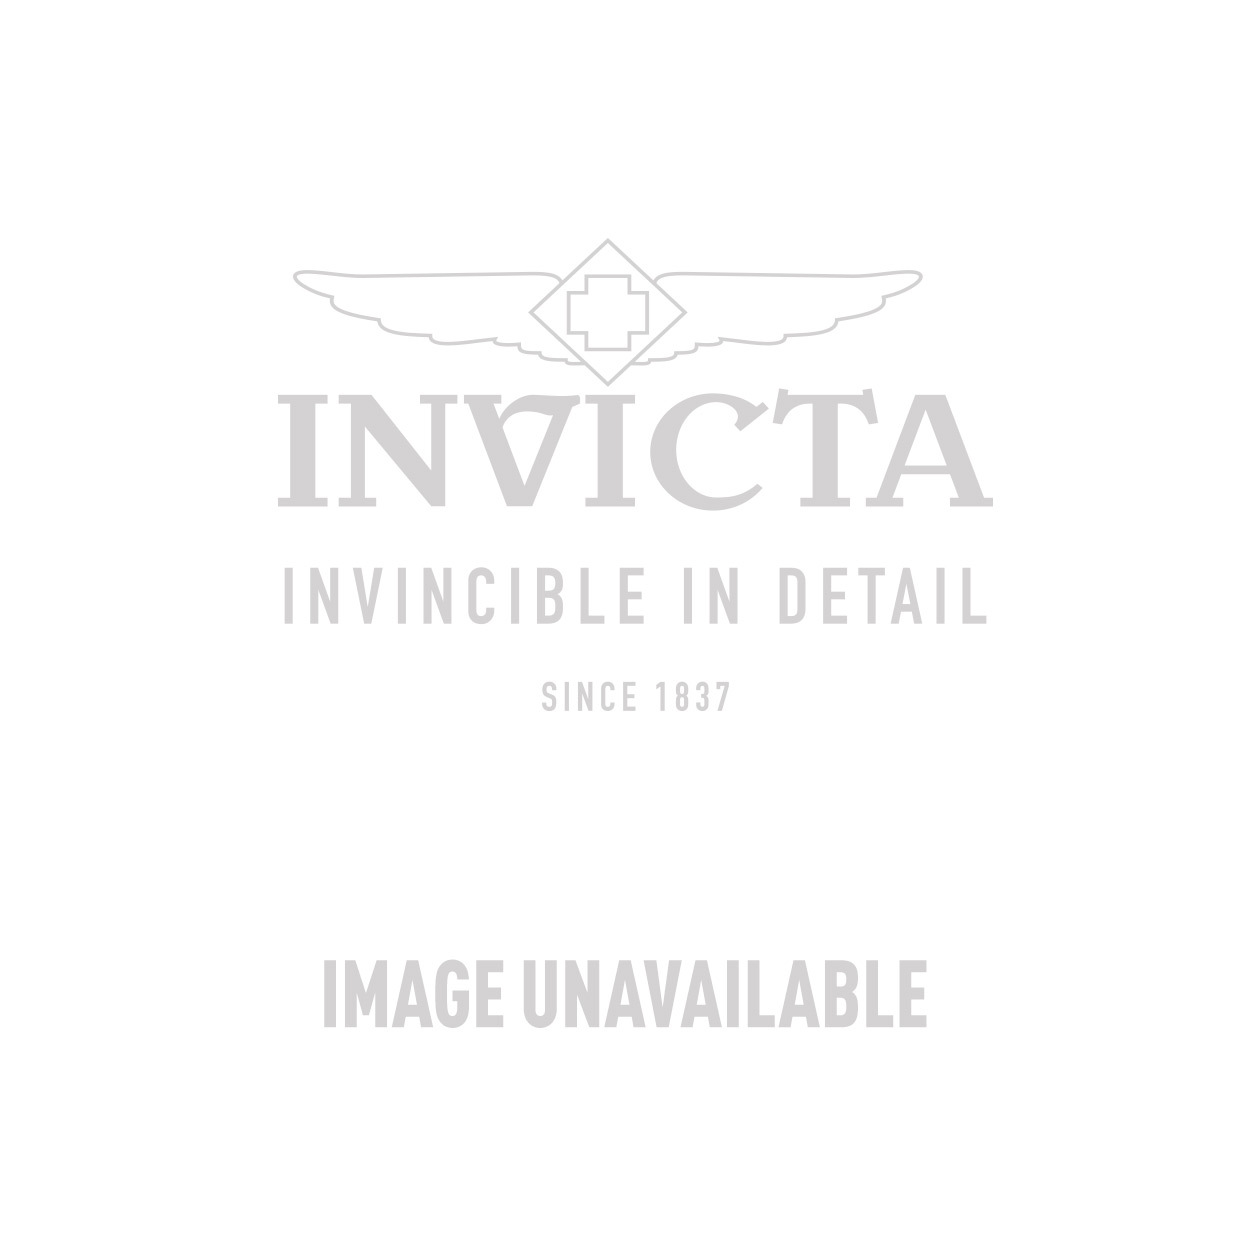 Invicta Coalition Forces Mens Quartz 46 mm Stainless Steel - Model 30460